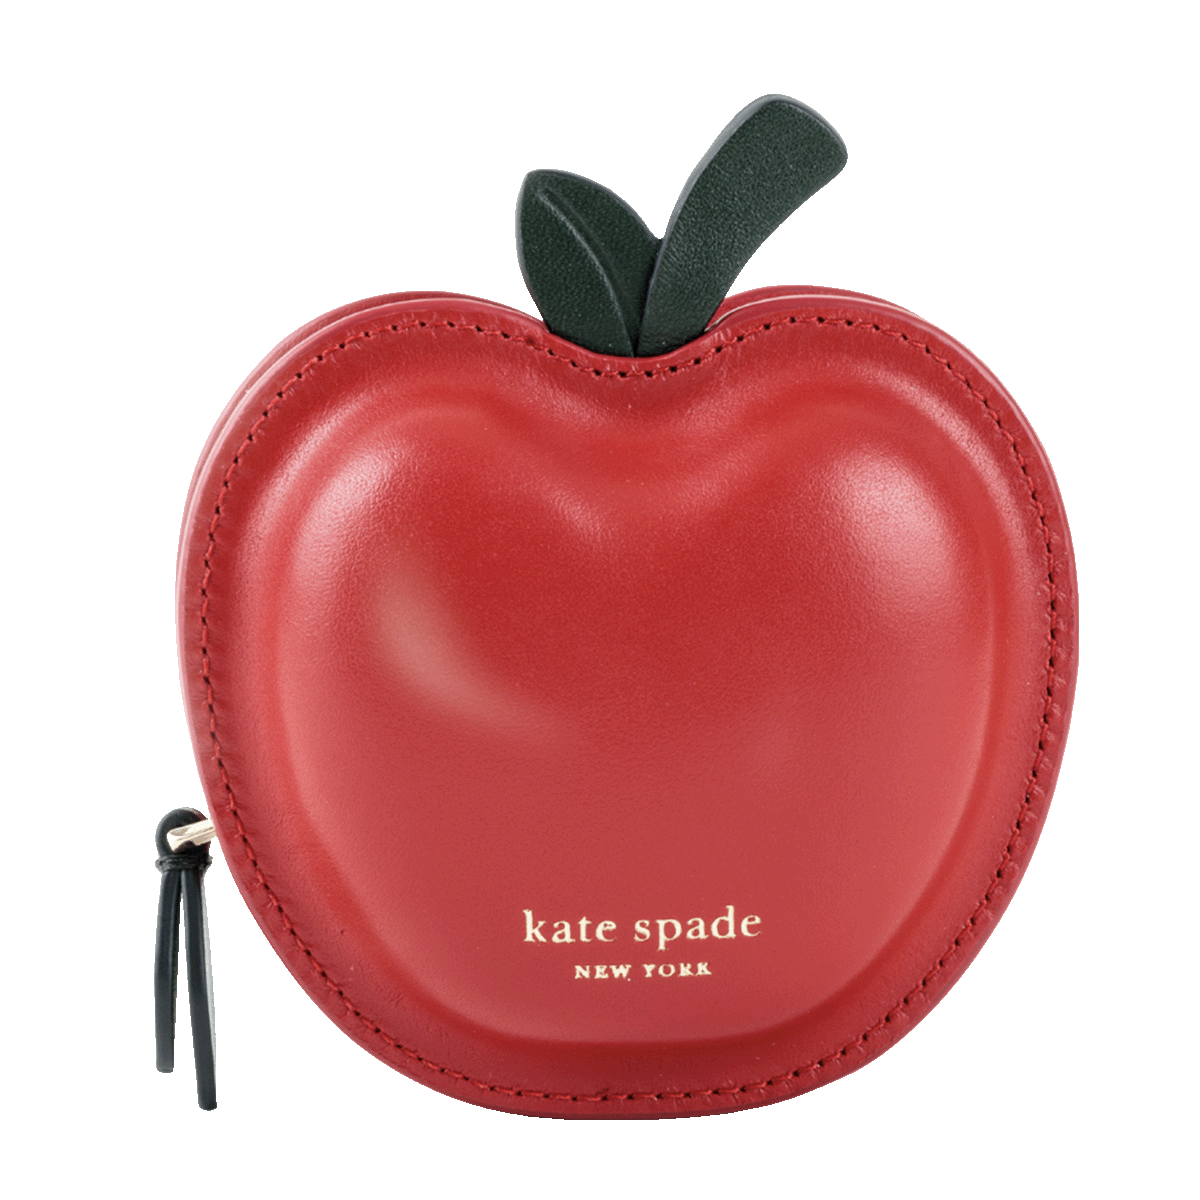 Harbour City - Get playful with Kate Spade and their fruit... | Facebook